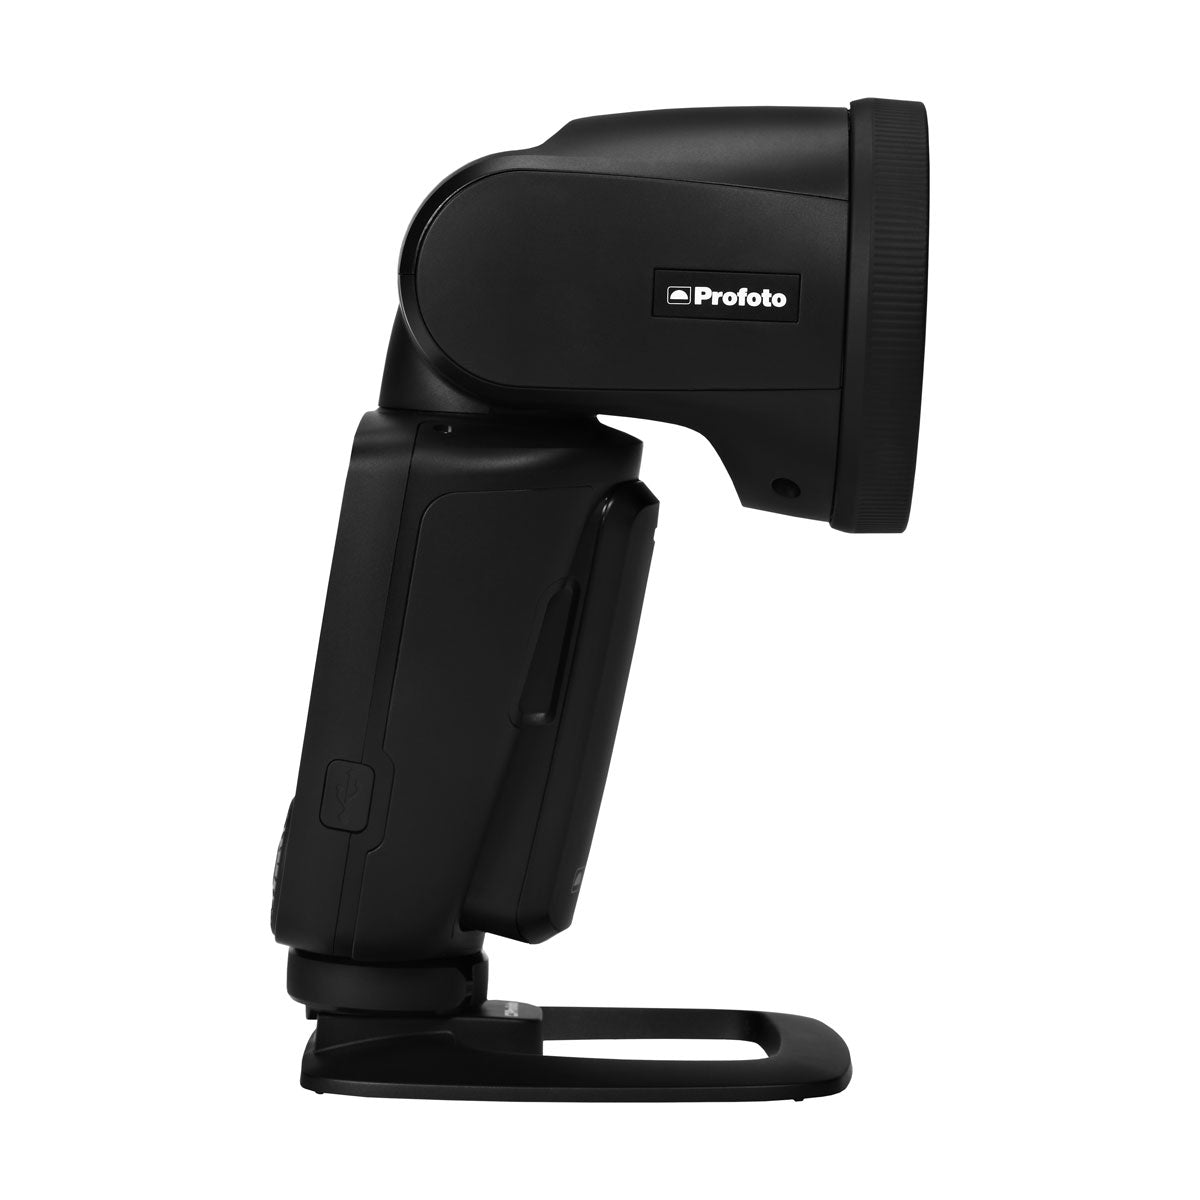 Profoto A1X Off Camera Flash Kit for Canon